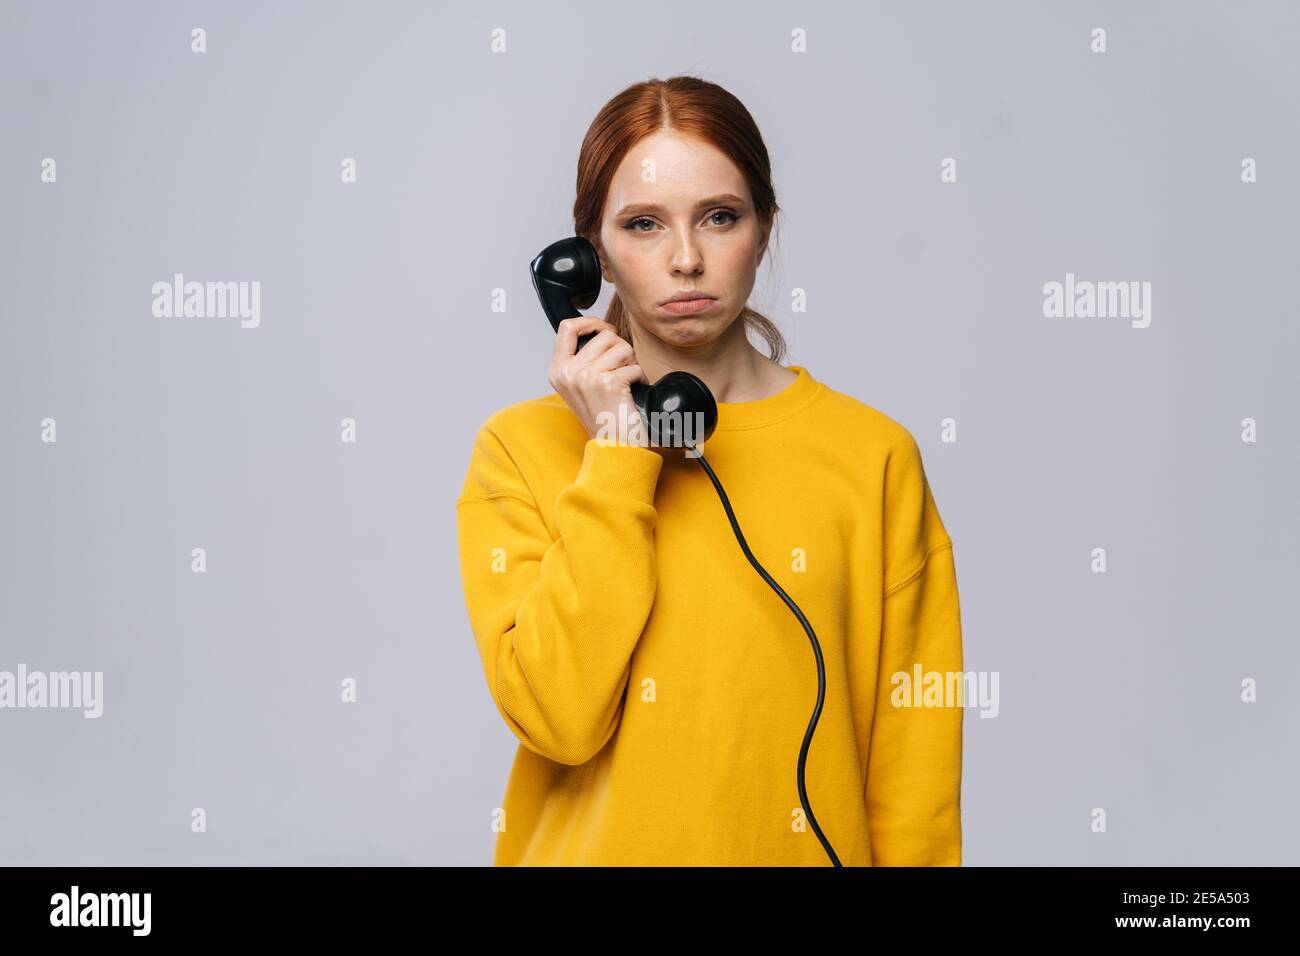 Sad unhappy young woman in stylish yellow sweater talking on retro phone and looking at camera Stock Photo